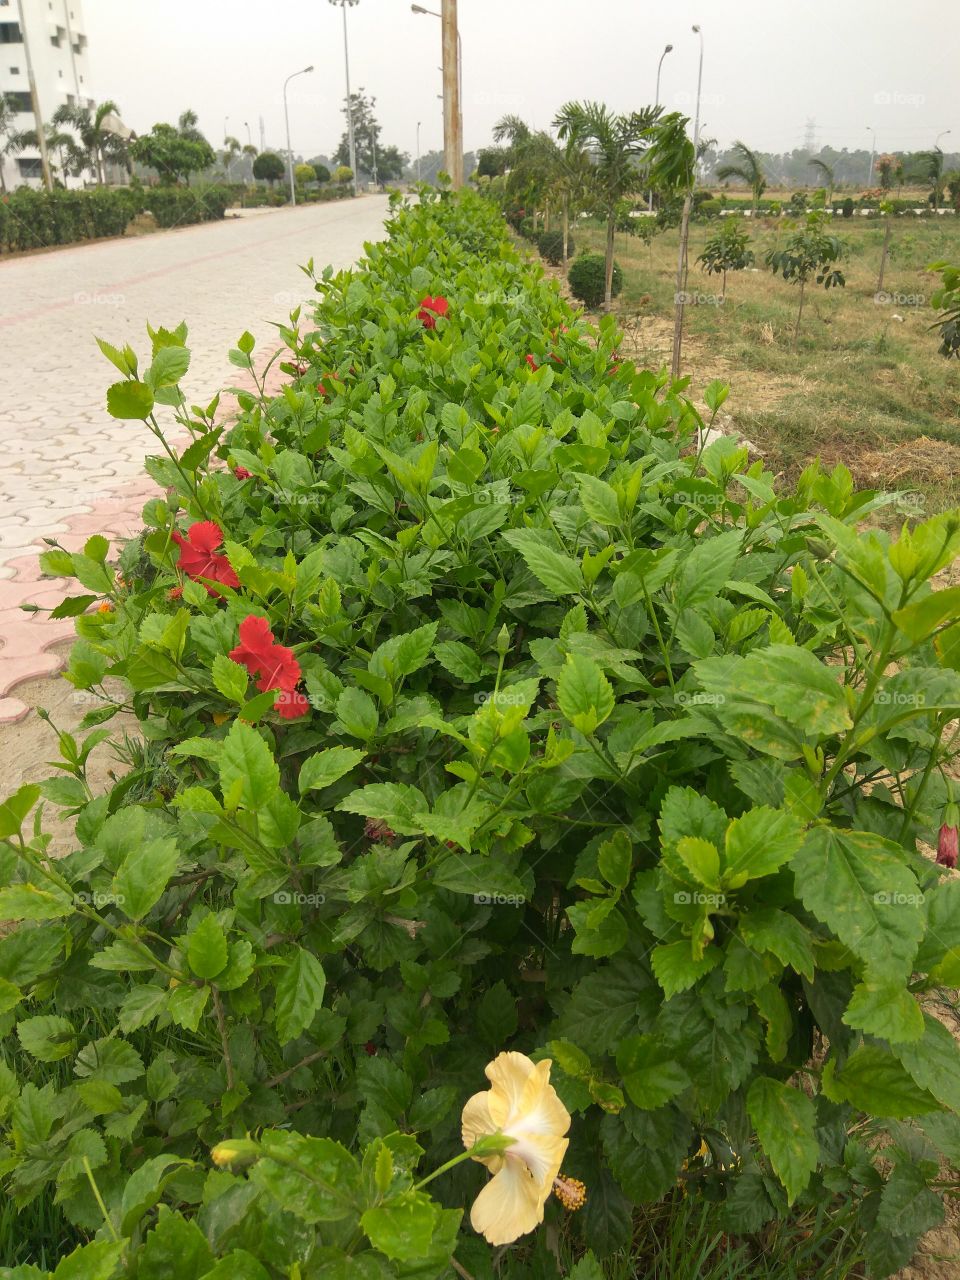 Red udhul flowers